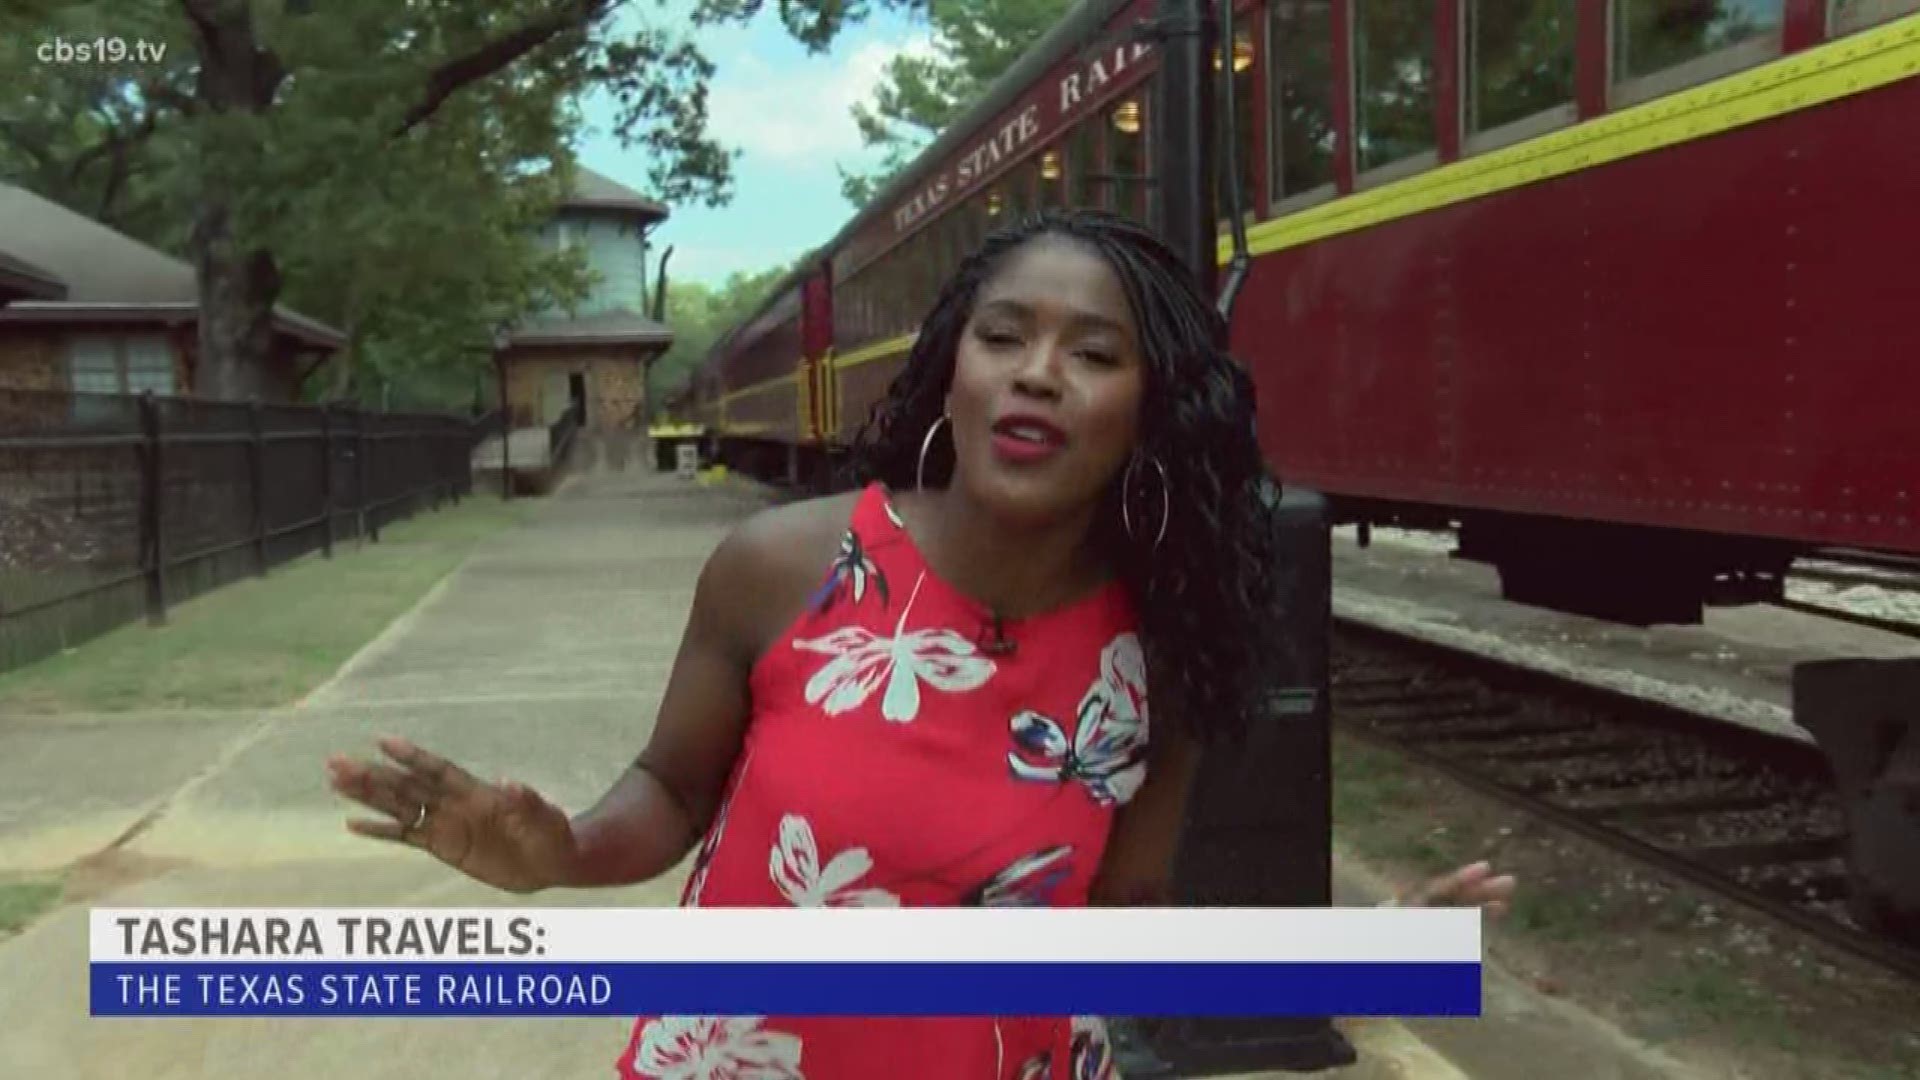 Have some historical fun with Tashara on this adventurous East Texas attraction